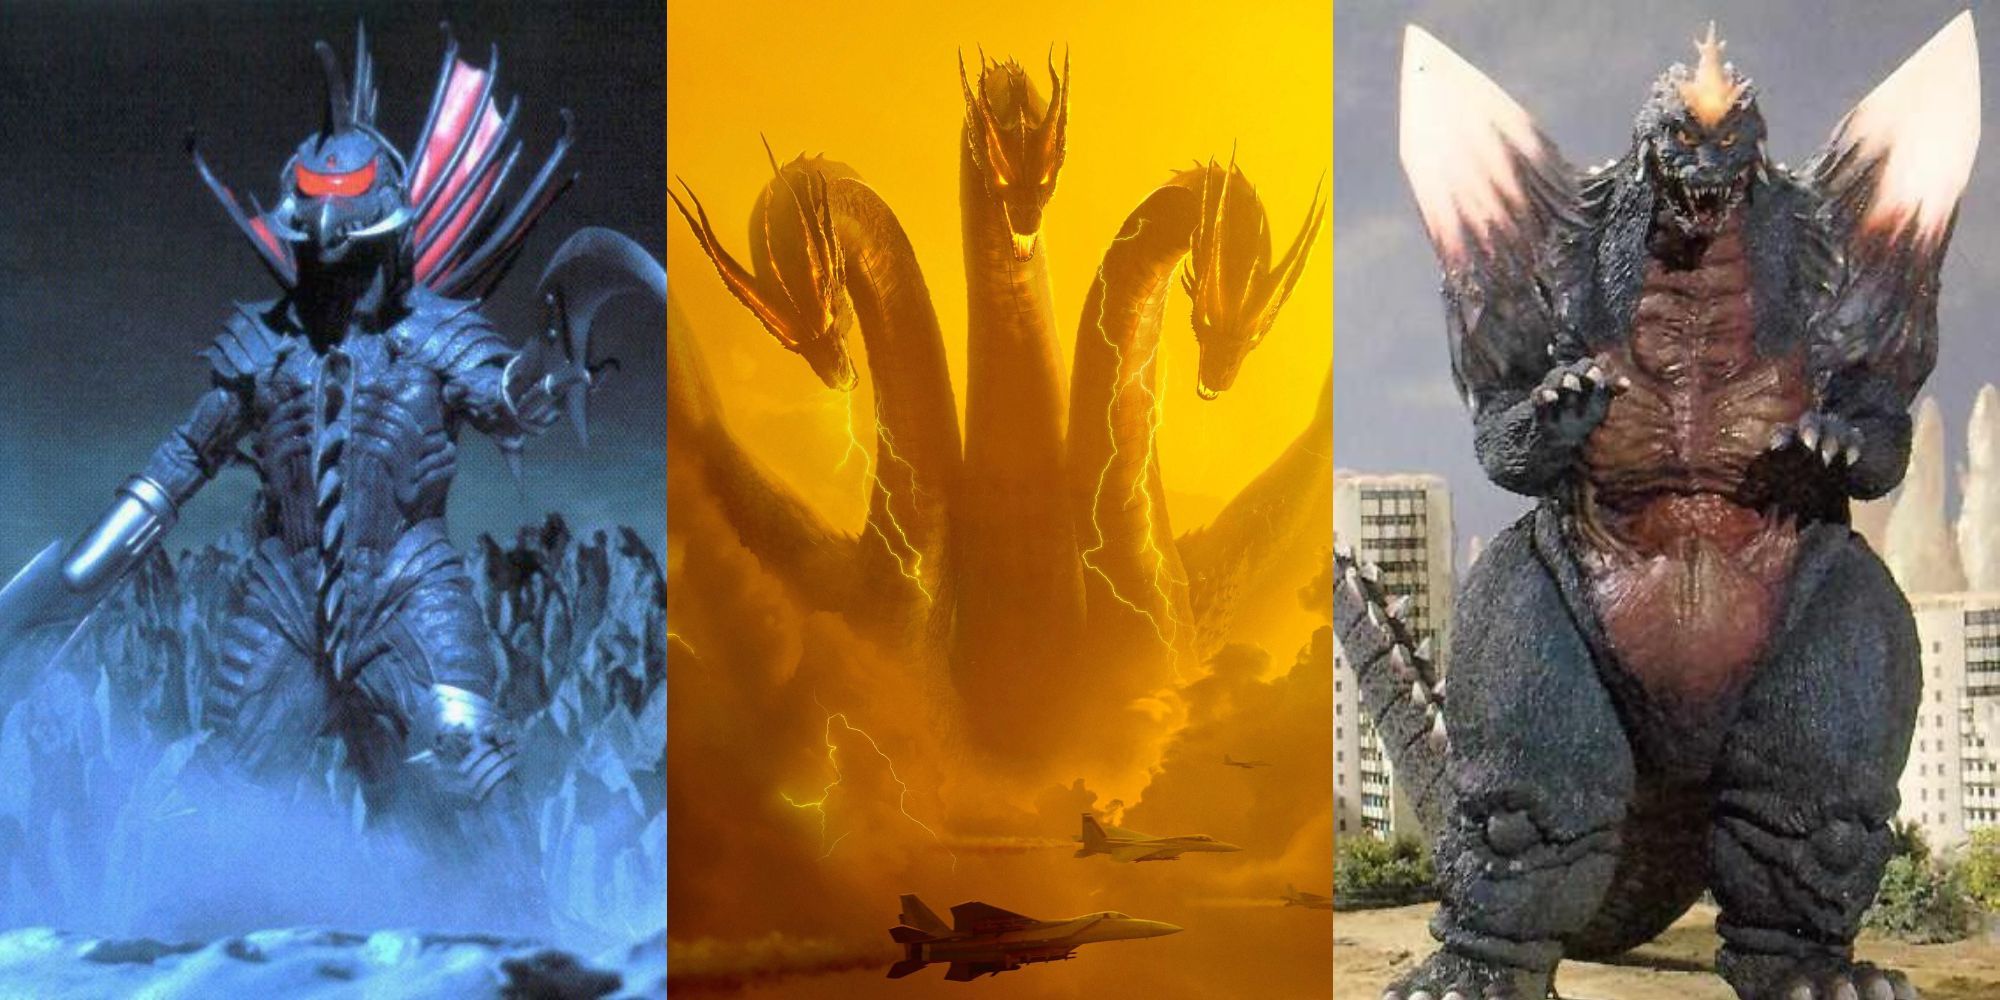 A collage with some of the most famous alien monsters from the Godzilla franchise: Gigan, King Ghidorah and SpaceGodzilla.